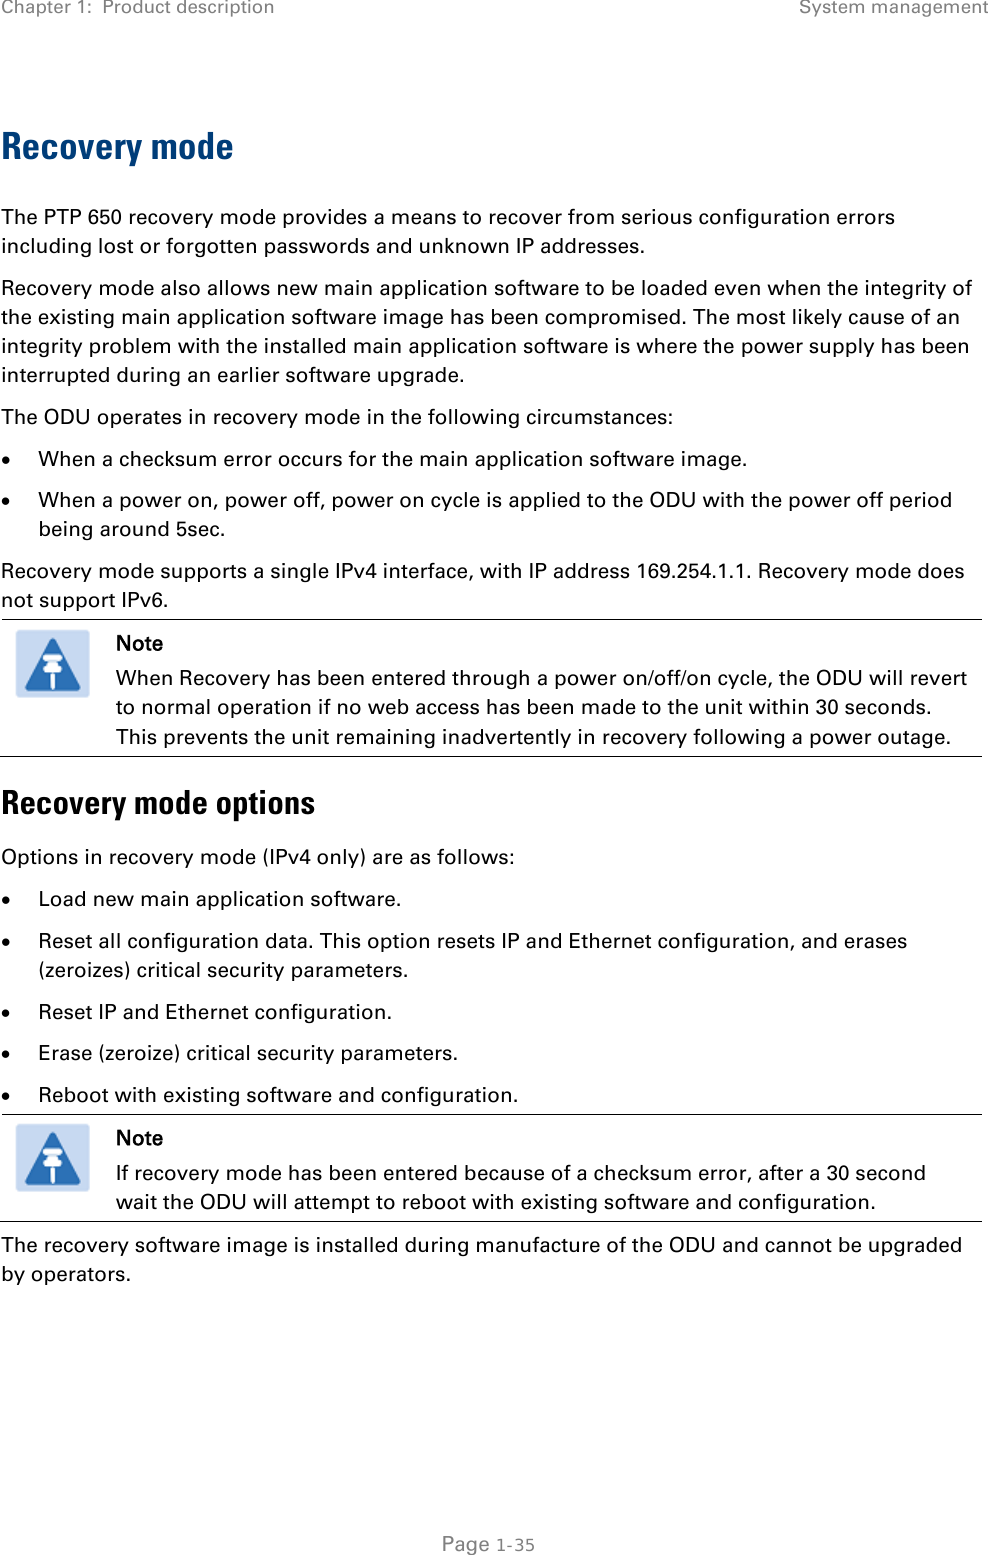 Chapter 1:  Product description System management  Recovery mode The PTP 650 recovery mode provides a means to recover from serious configuration errors including lost or forgotten passwords and unknown IP addresses. Recovery mode also allows new main application software to be loaded even when the integrity of the existing main application software image has been compromised. The most likely cause of an integrity problem with the installed main application software is where the power supply has been interrupted during an earlier software upgrade. The ODU operates in recovery mode in the following circumstances: • When a checksum error occurs for the main application software image. • When a power on, power off, power on cycle is applied to the ODU with the power off period being around 5sec. Recovery mode supports a single IPv4 interface, with IP address 169.254.1.1. Recovery mode does not support IPv6.   Note When Recovery has been entered through a power on/off/on cycle, the ODU will revert to normal operation if no web access has been made to the unit within 30 seconds. This prevents the unit remaining inadvertently in recovery following a power outage. Recovery mode options Options in recovery mode (IPv4 only) are as follows: • Load new main application software. • Reset all configuration data. This option resets IP and Ethernet configuration, and erases (zeroizes) critical security parameters. • Reset IP and Ethernet configuration. • Erase (zeroize) critical security parameters. • Reboot with existing software and configuration.  Note If recovery mode has been entered because of a checksum error, after a 30 second wait the ODU will attempt to reboot with existing software and configuration. The recovery software image is installed during manufacture of the ODU and cannot be upgraded by operators.   Page 1-35 